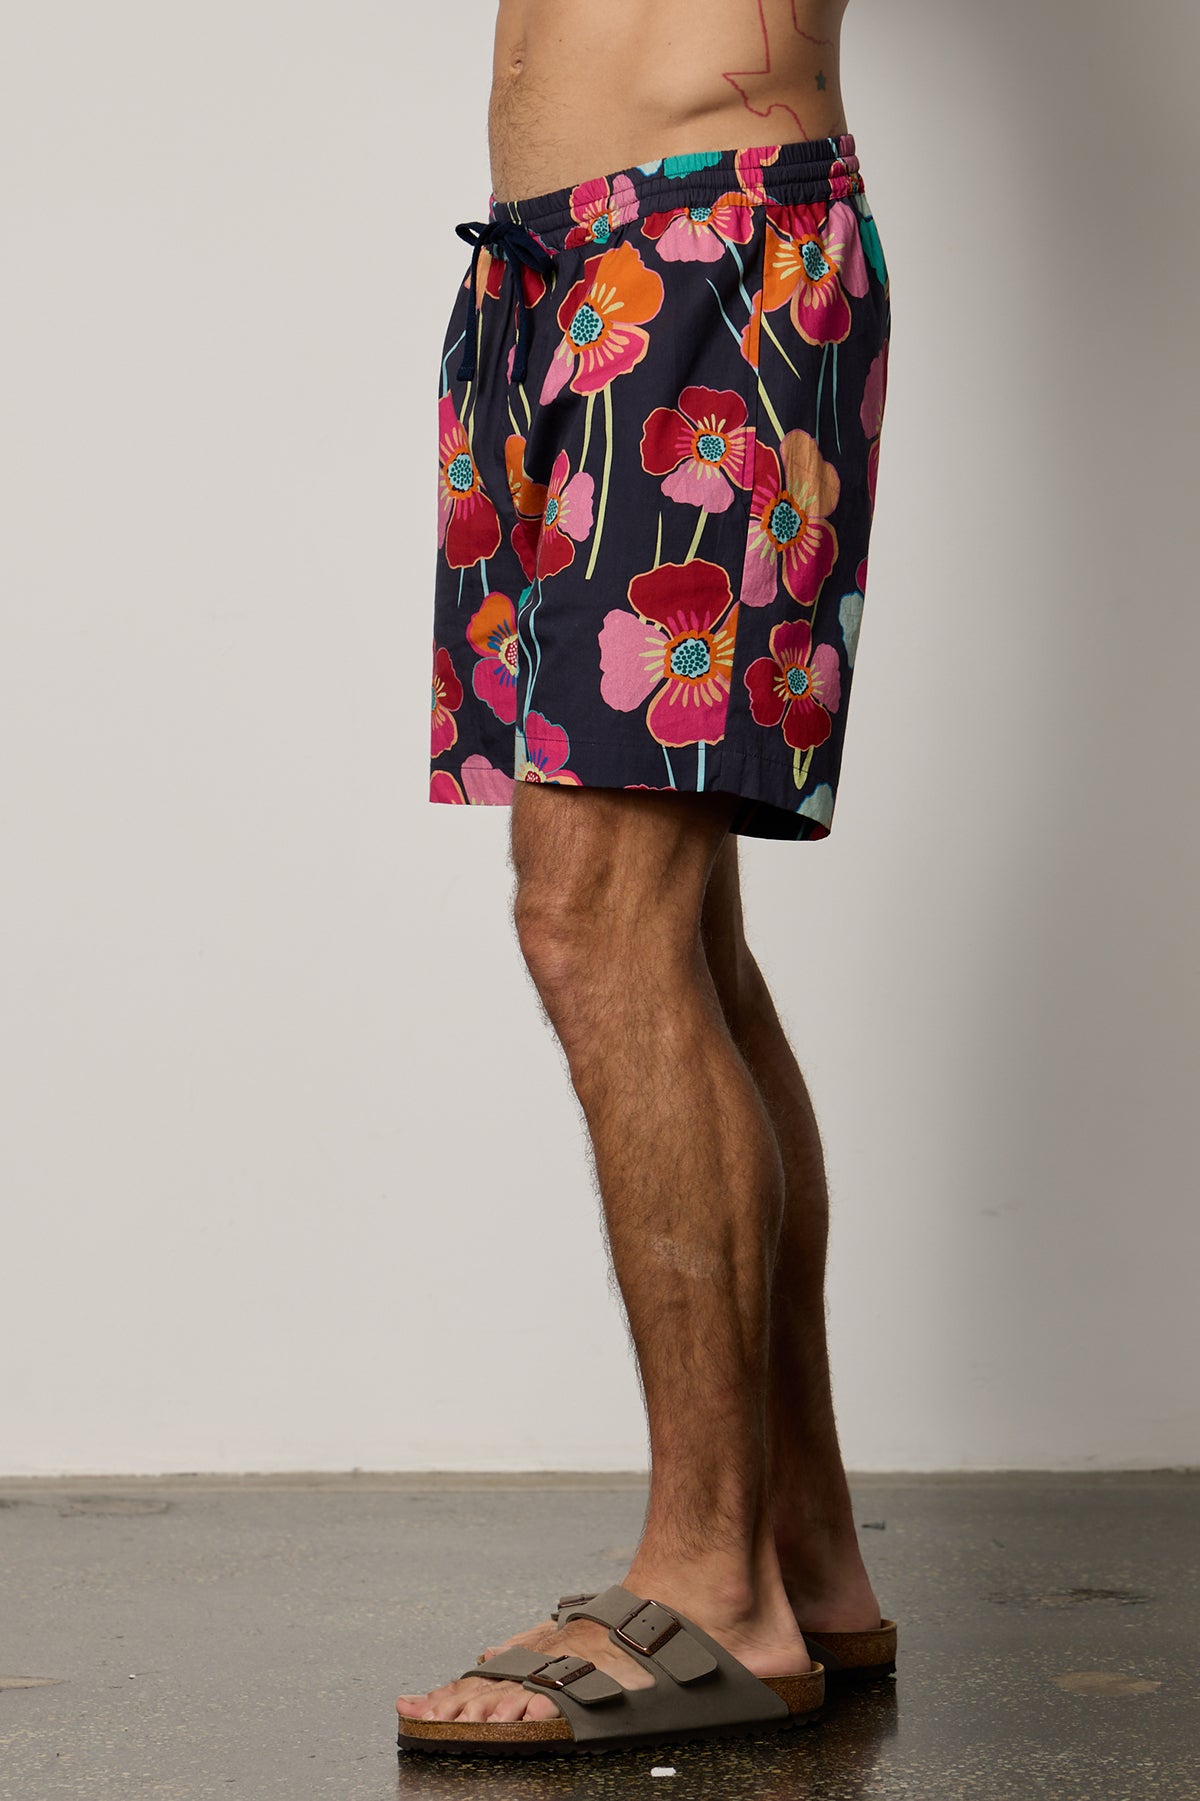 Colt Short side in bahama print with bold, multi colored floral pattern with dark background-26266340917441